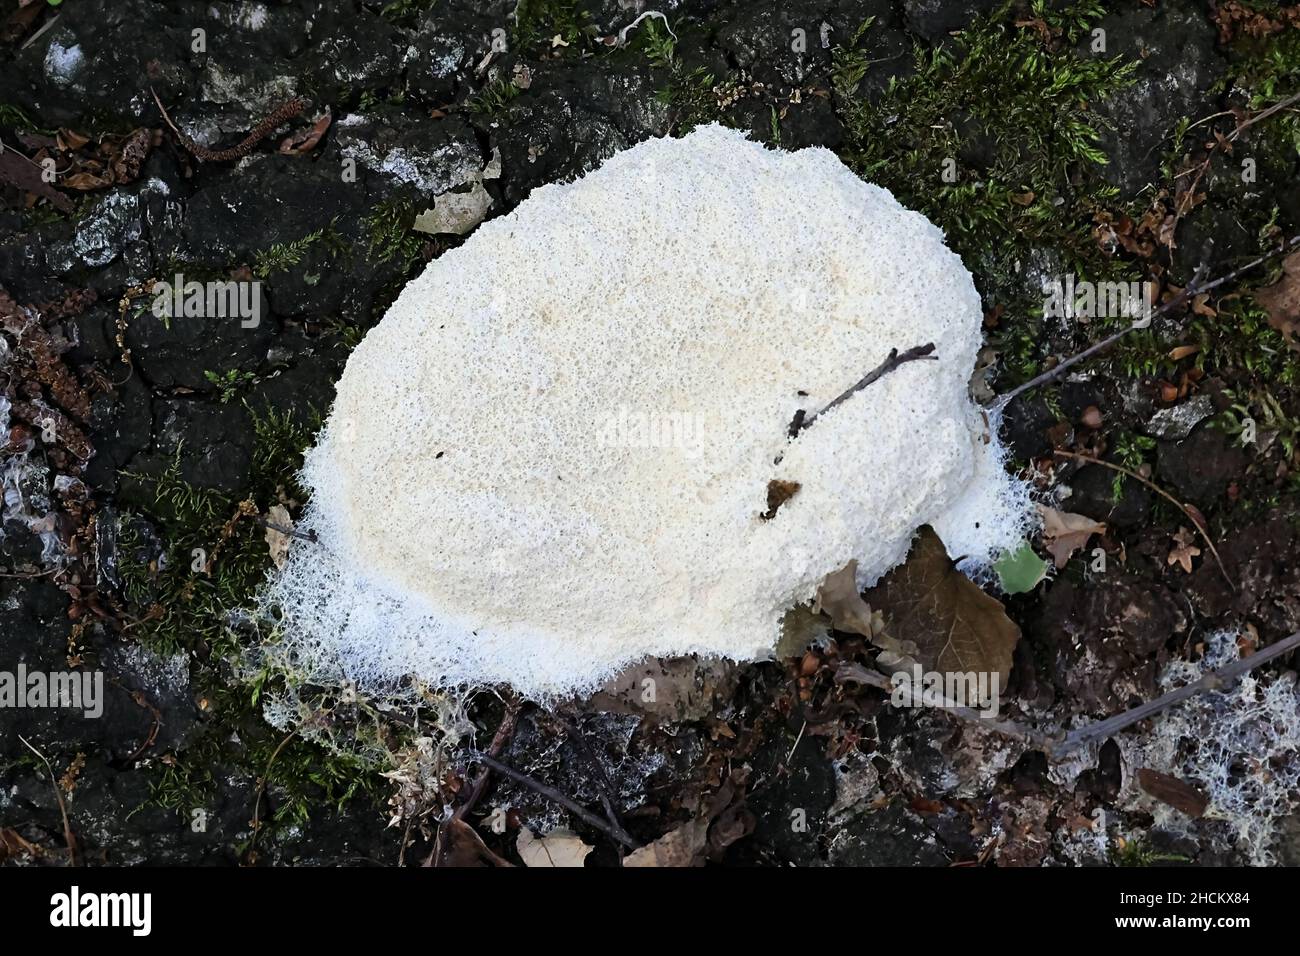 Fuligo septica var. candida, known as scrambled egg slime mold and dog vomit slime mold Stock Photo